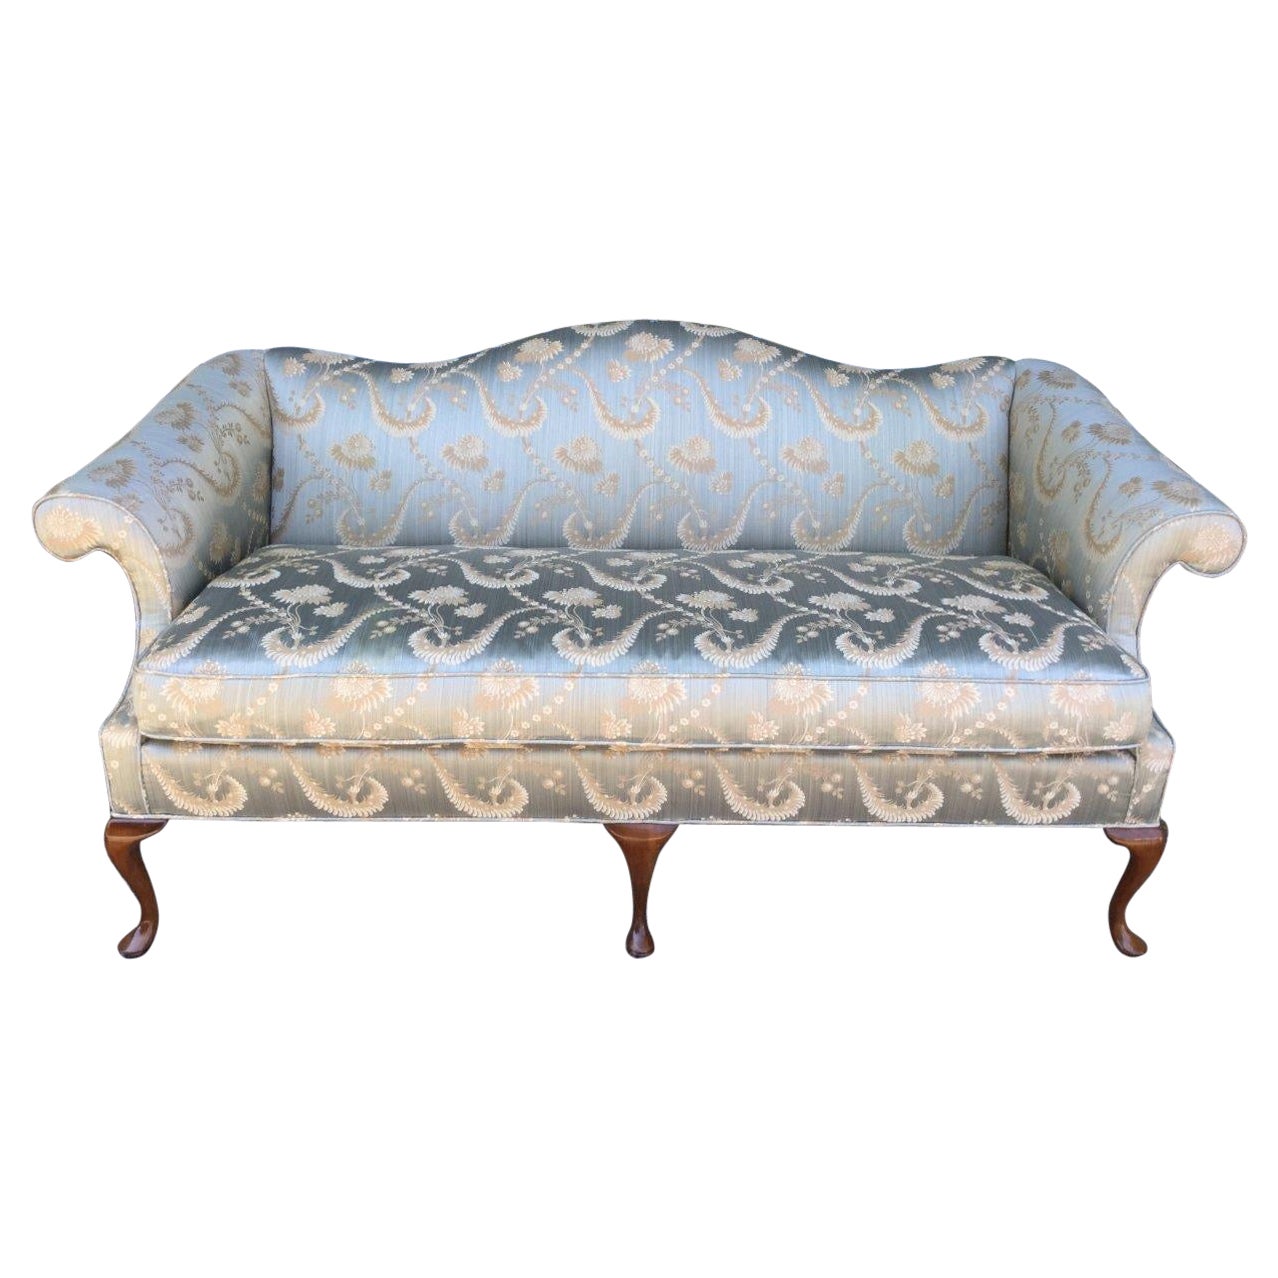 Moviestar Glam Blue Silk Camelback Settee Loveseat with Rolled Arms